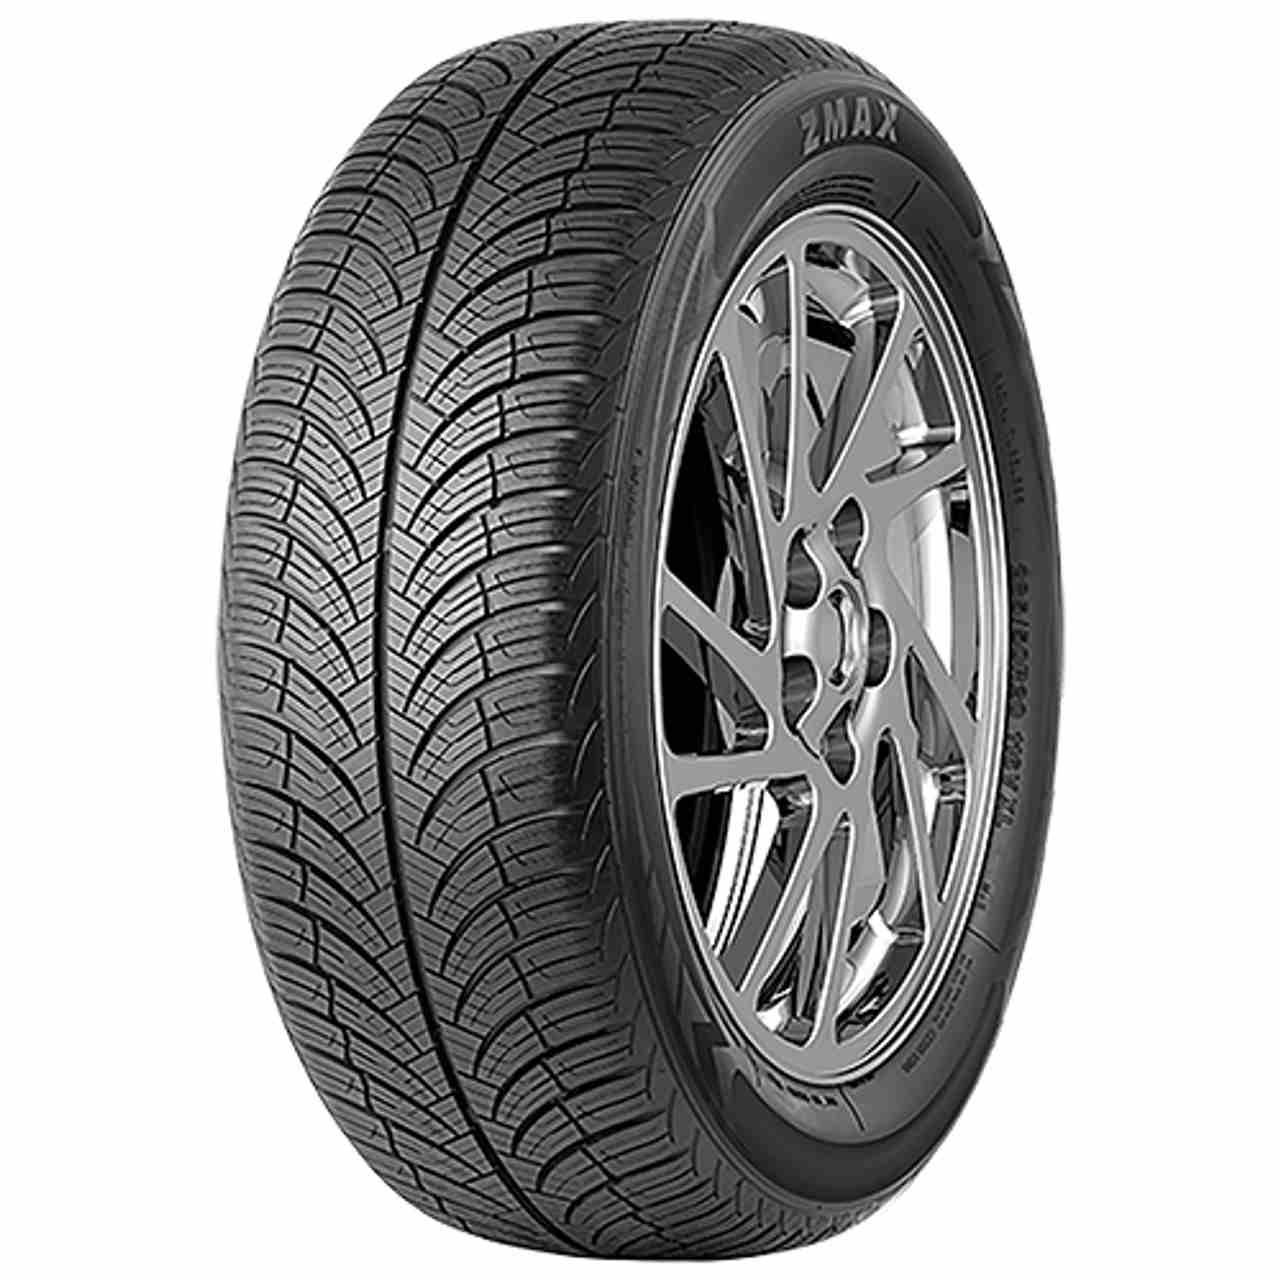 ZMAX X-SPIDER A/S 195/45R16 84V BSW